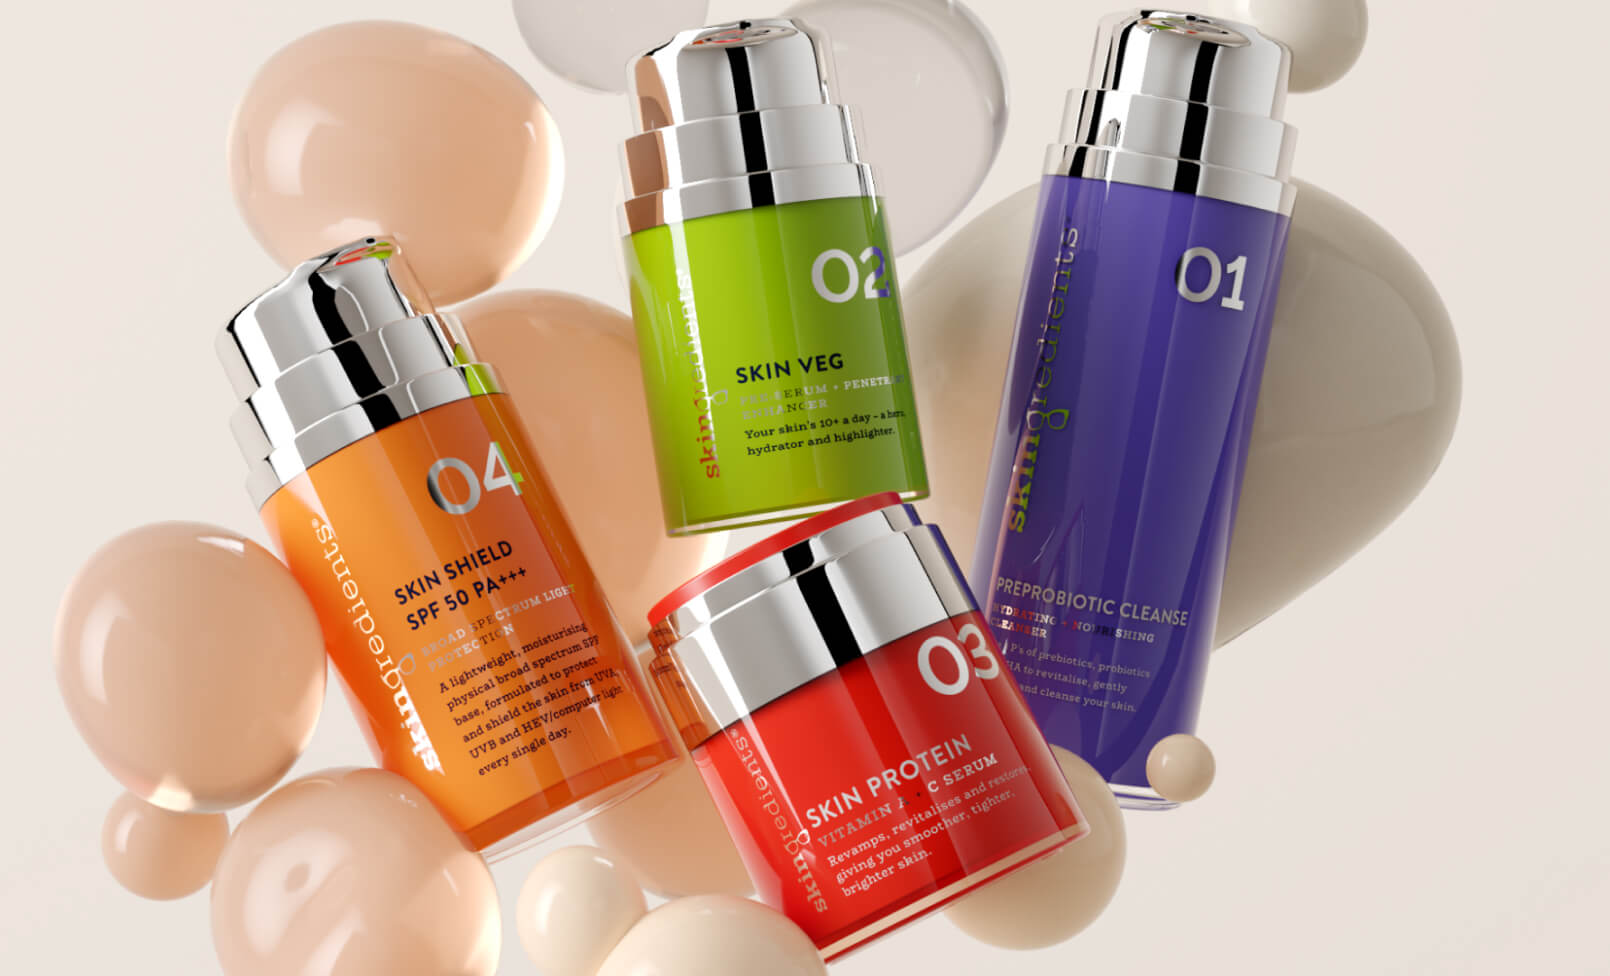 Four vibrantly coloured Skin Nerd products, each numbered from one through four indication the order to use them.